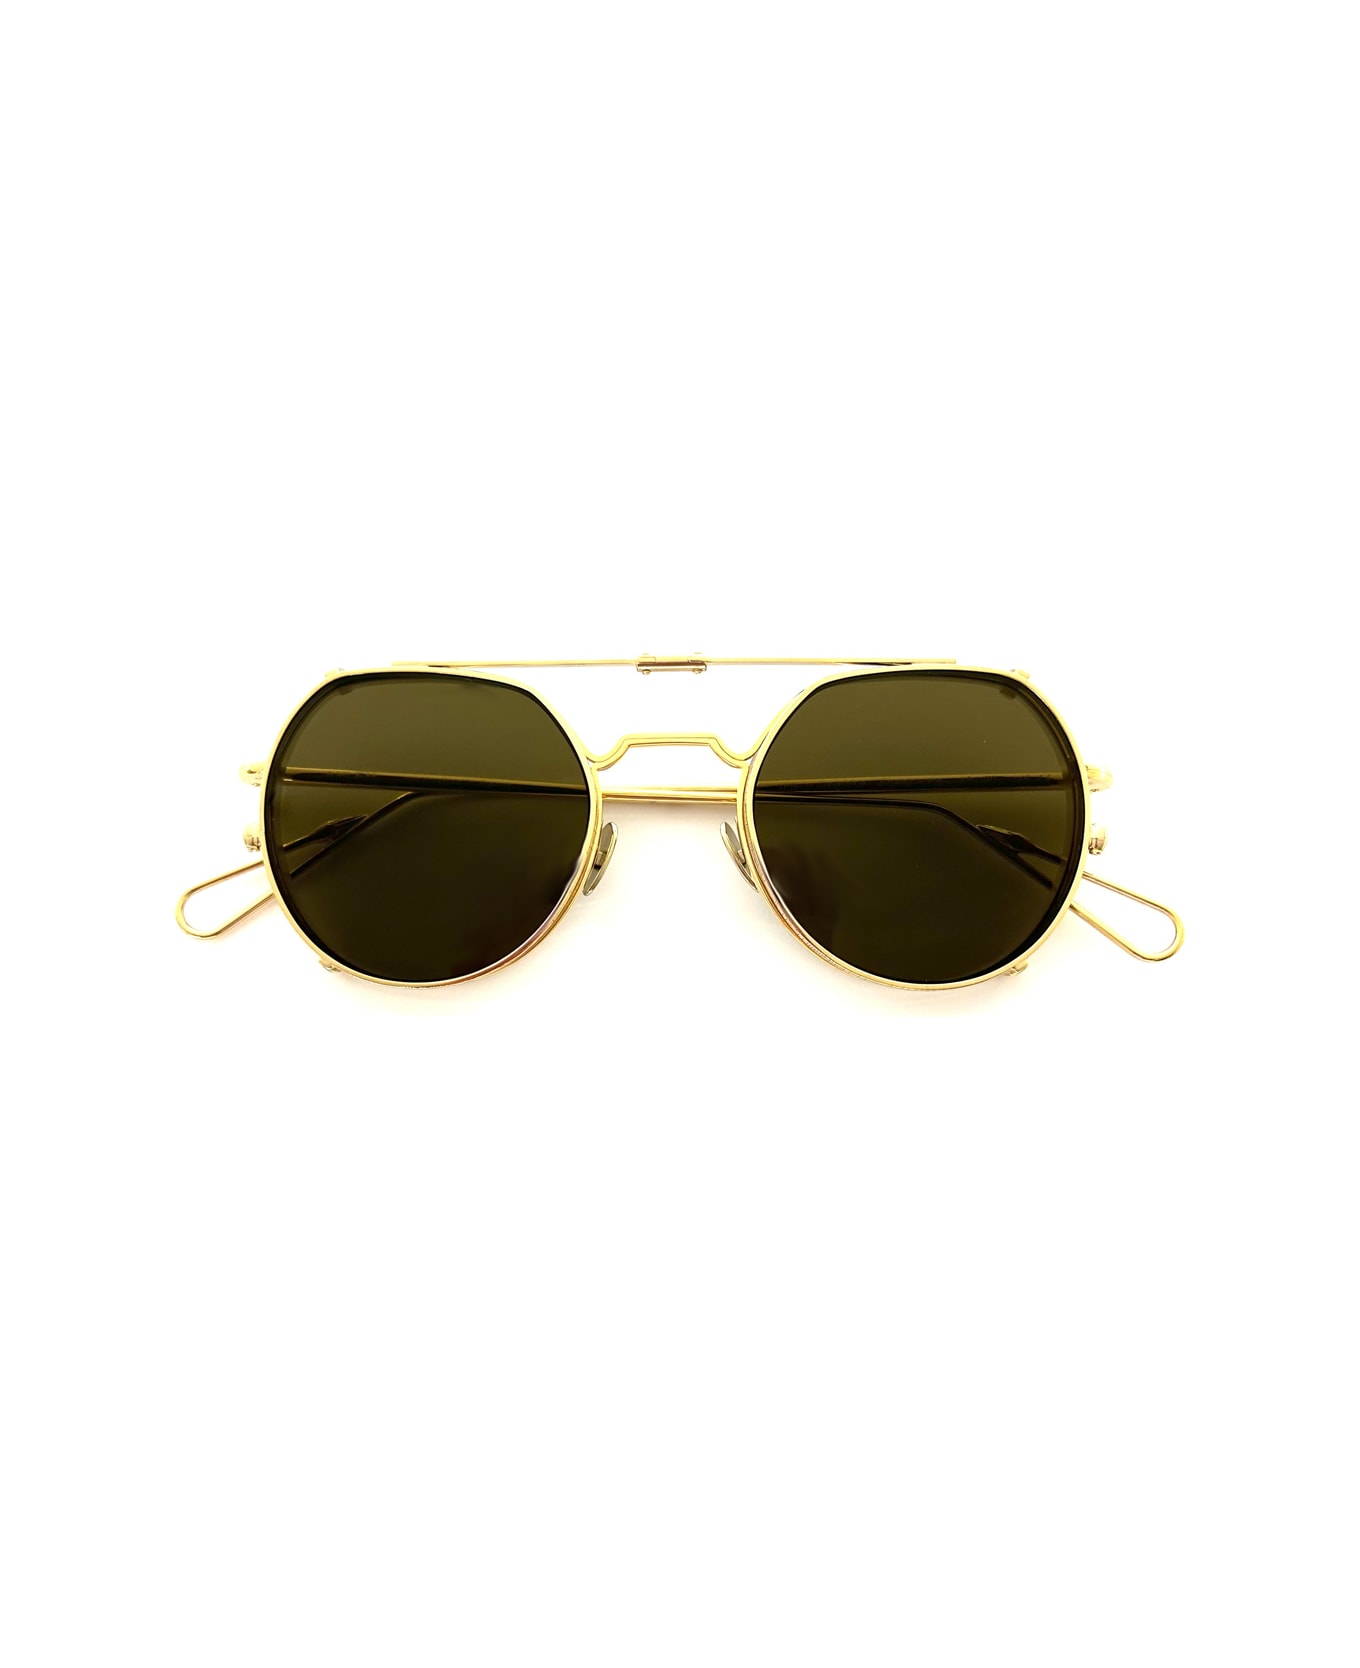 AHLEM Place Dauphine Clip Champagne Sunglasses - Oro